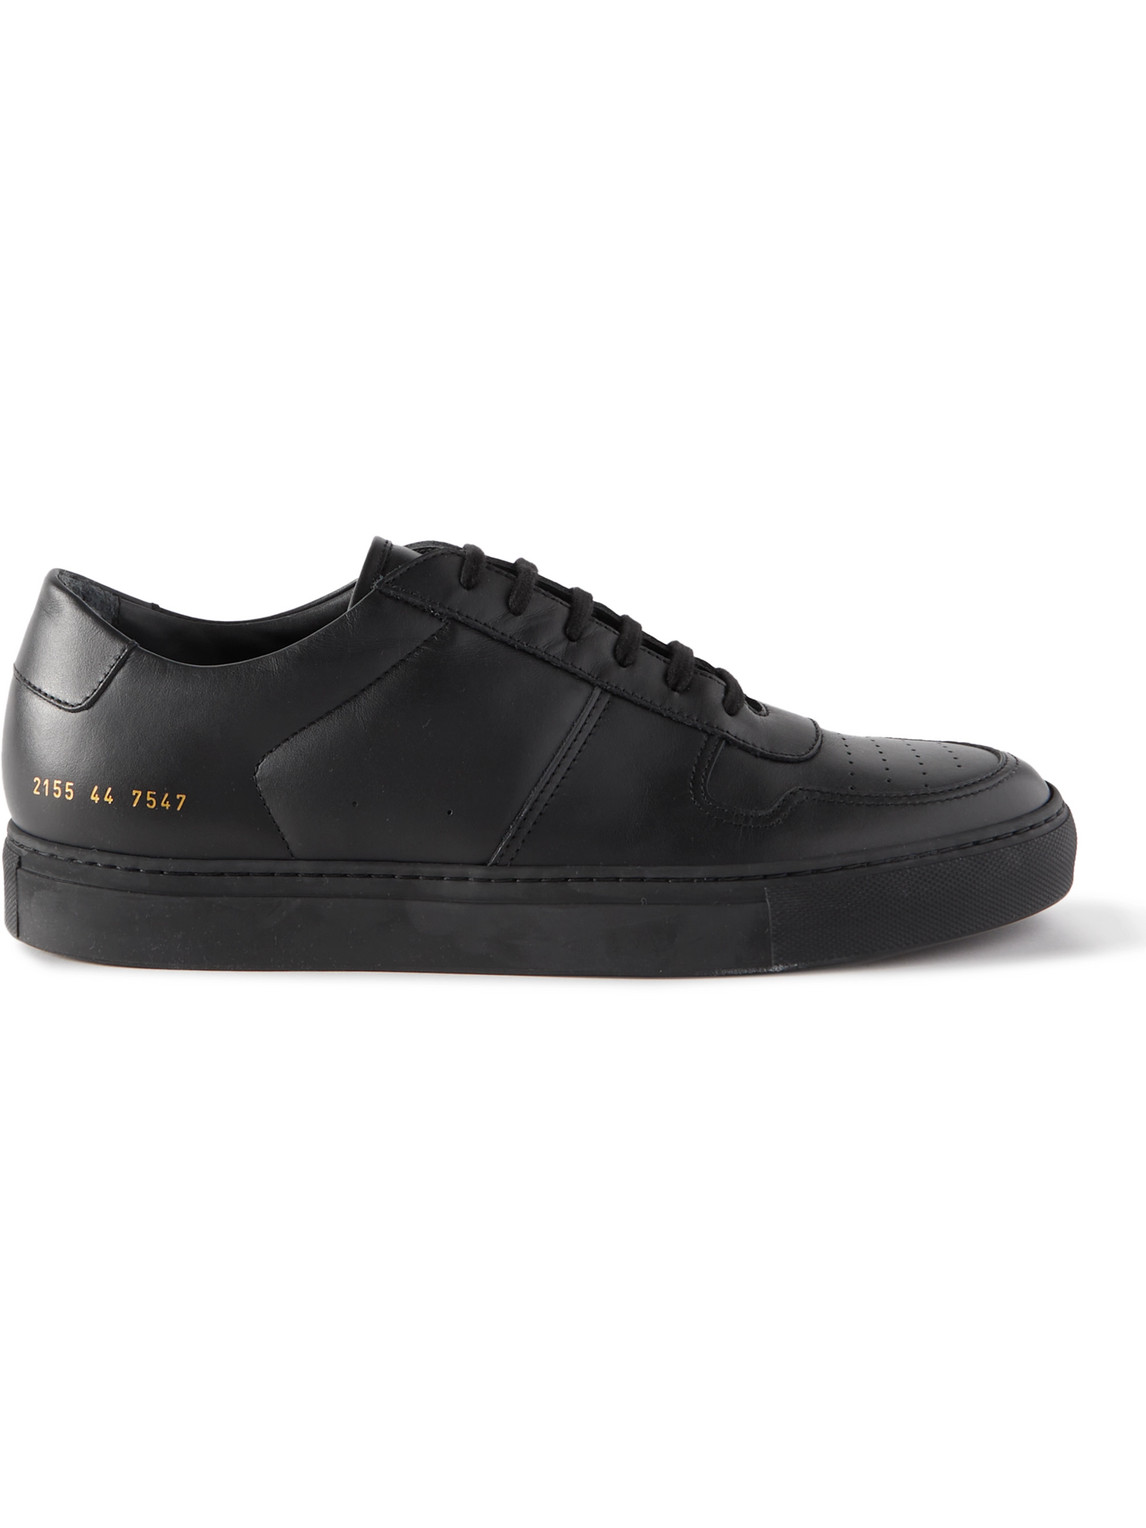 Common Projects - BBall Leather Sneakers - Men - Black - EU 45 von Common Projects